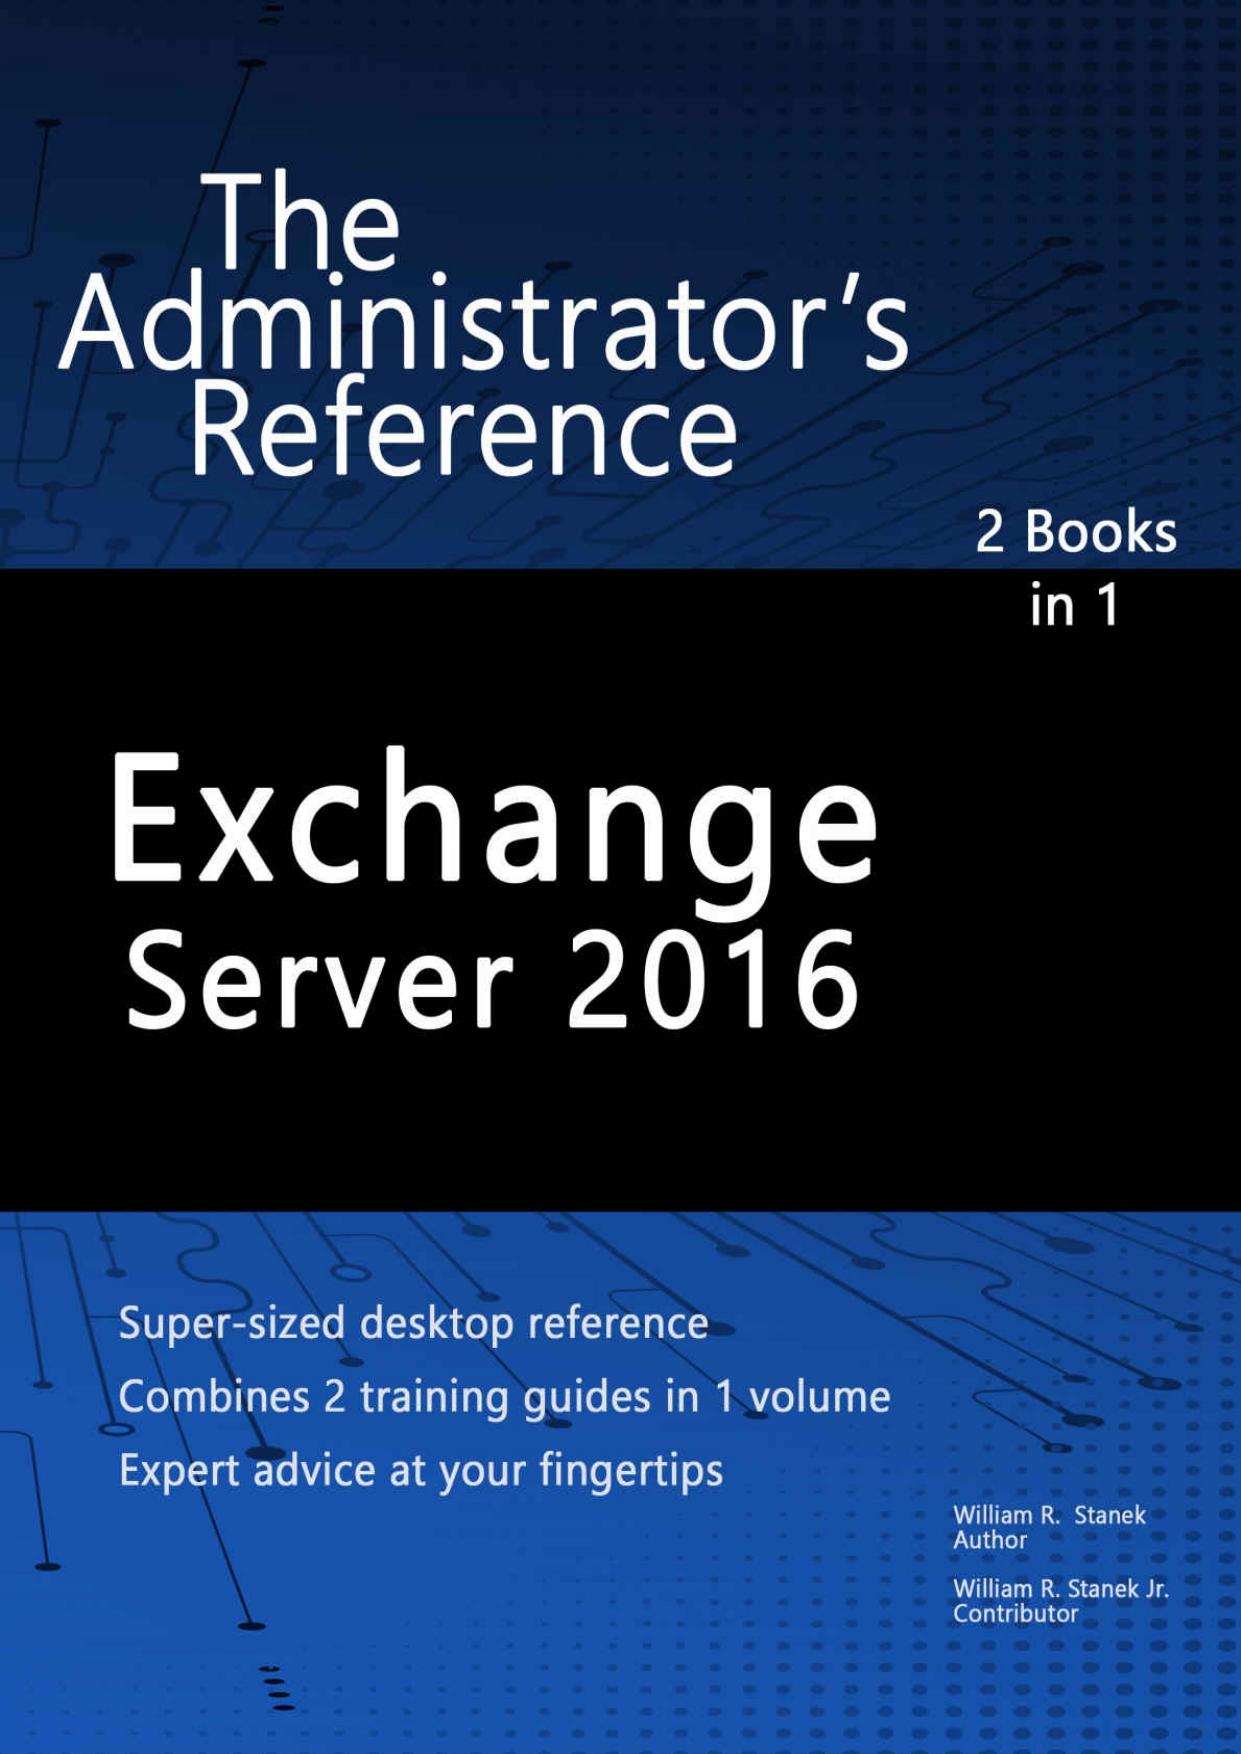 Exchange Server 2016: The Administrator’s Reference